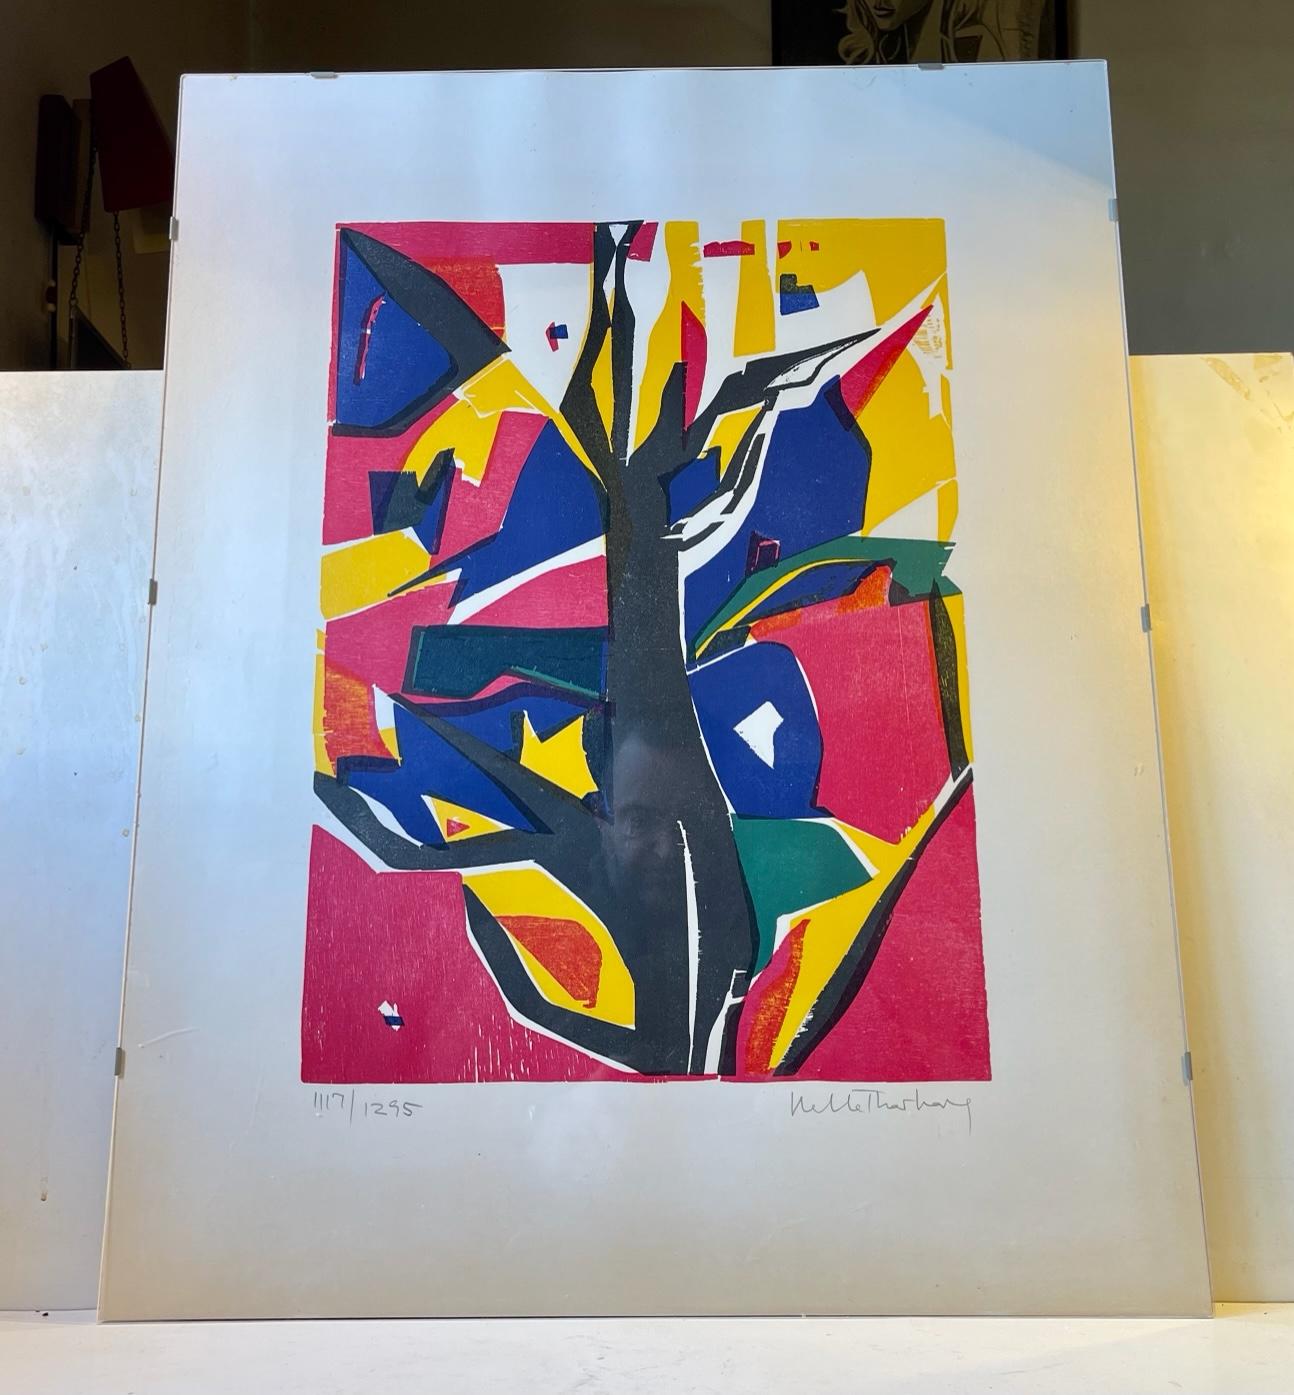 Helle Thorborg (b. 1927). Composition, woodcut, 356/1295, signed. Sheet size 69 x 54 cm. Mounted in acid free passepartout. Will be shipped rolled-up and un-framed for safety reason and to save you a lot.
A Female Danish Graphic artist mostly known